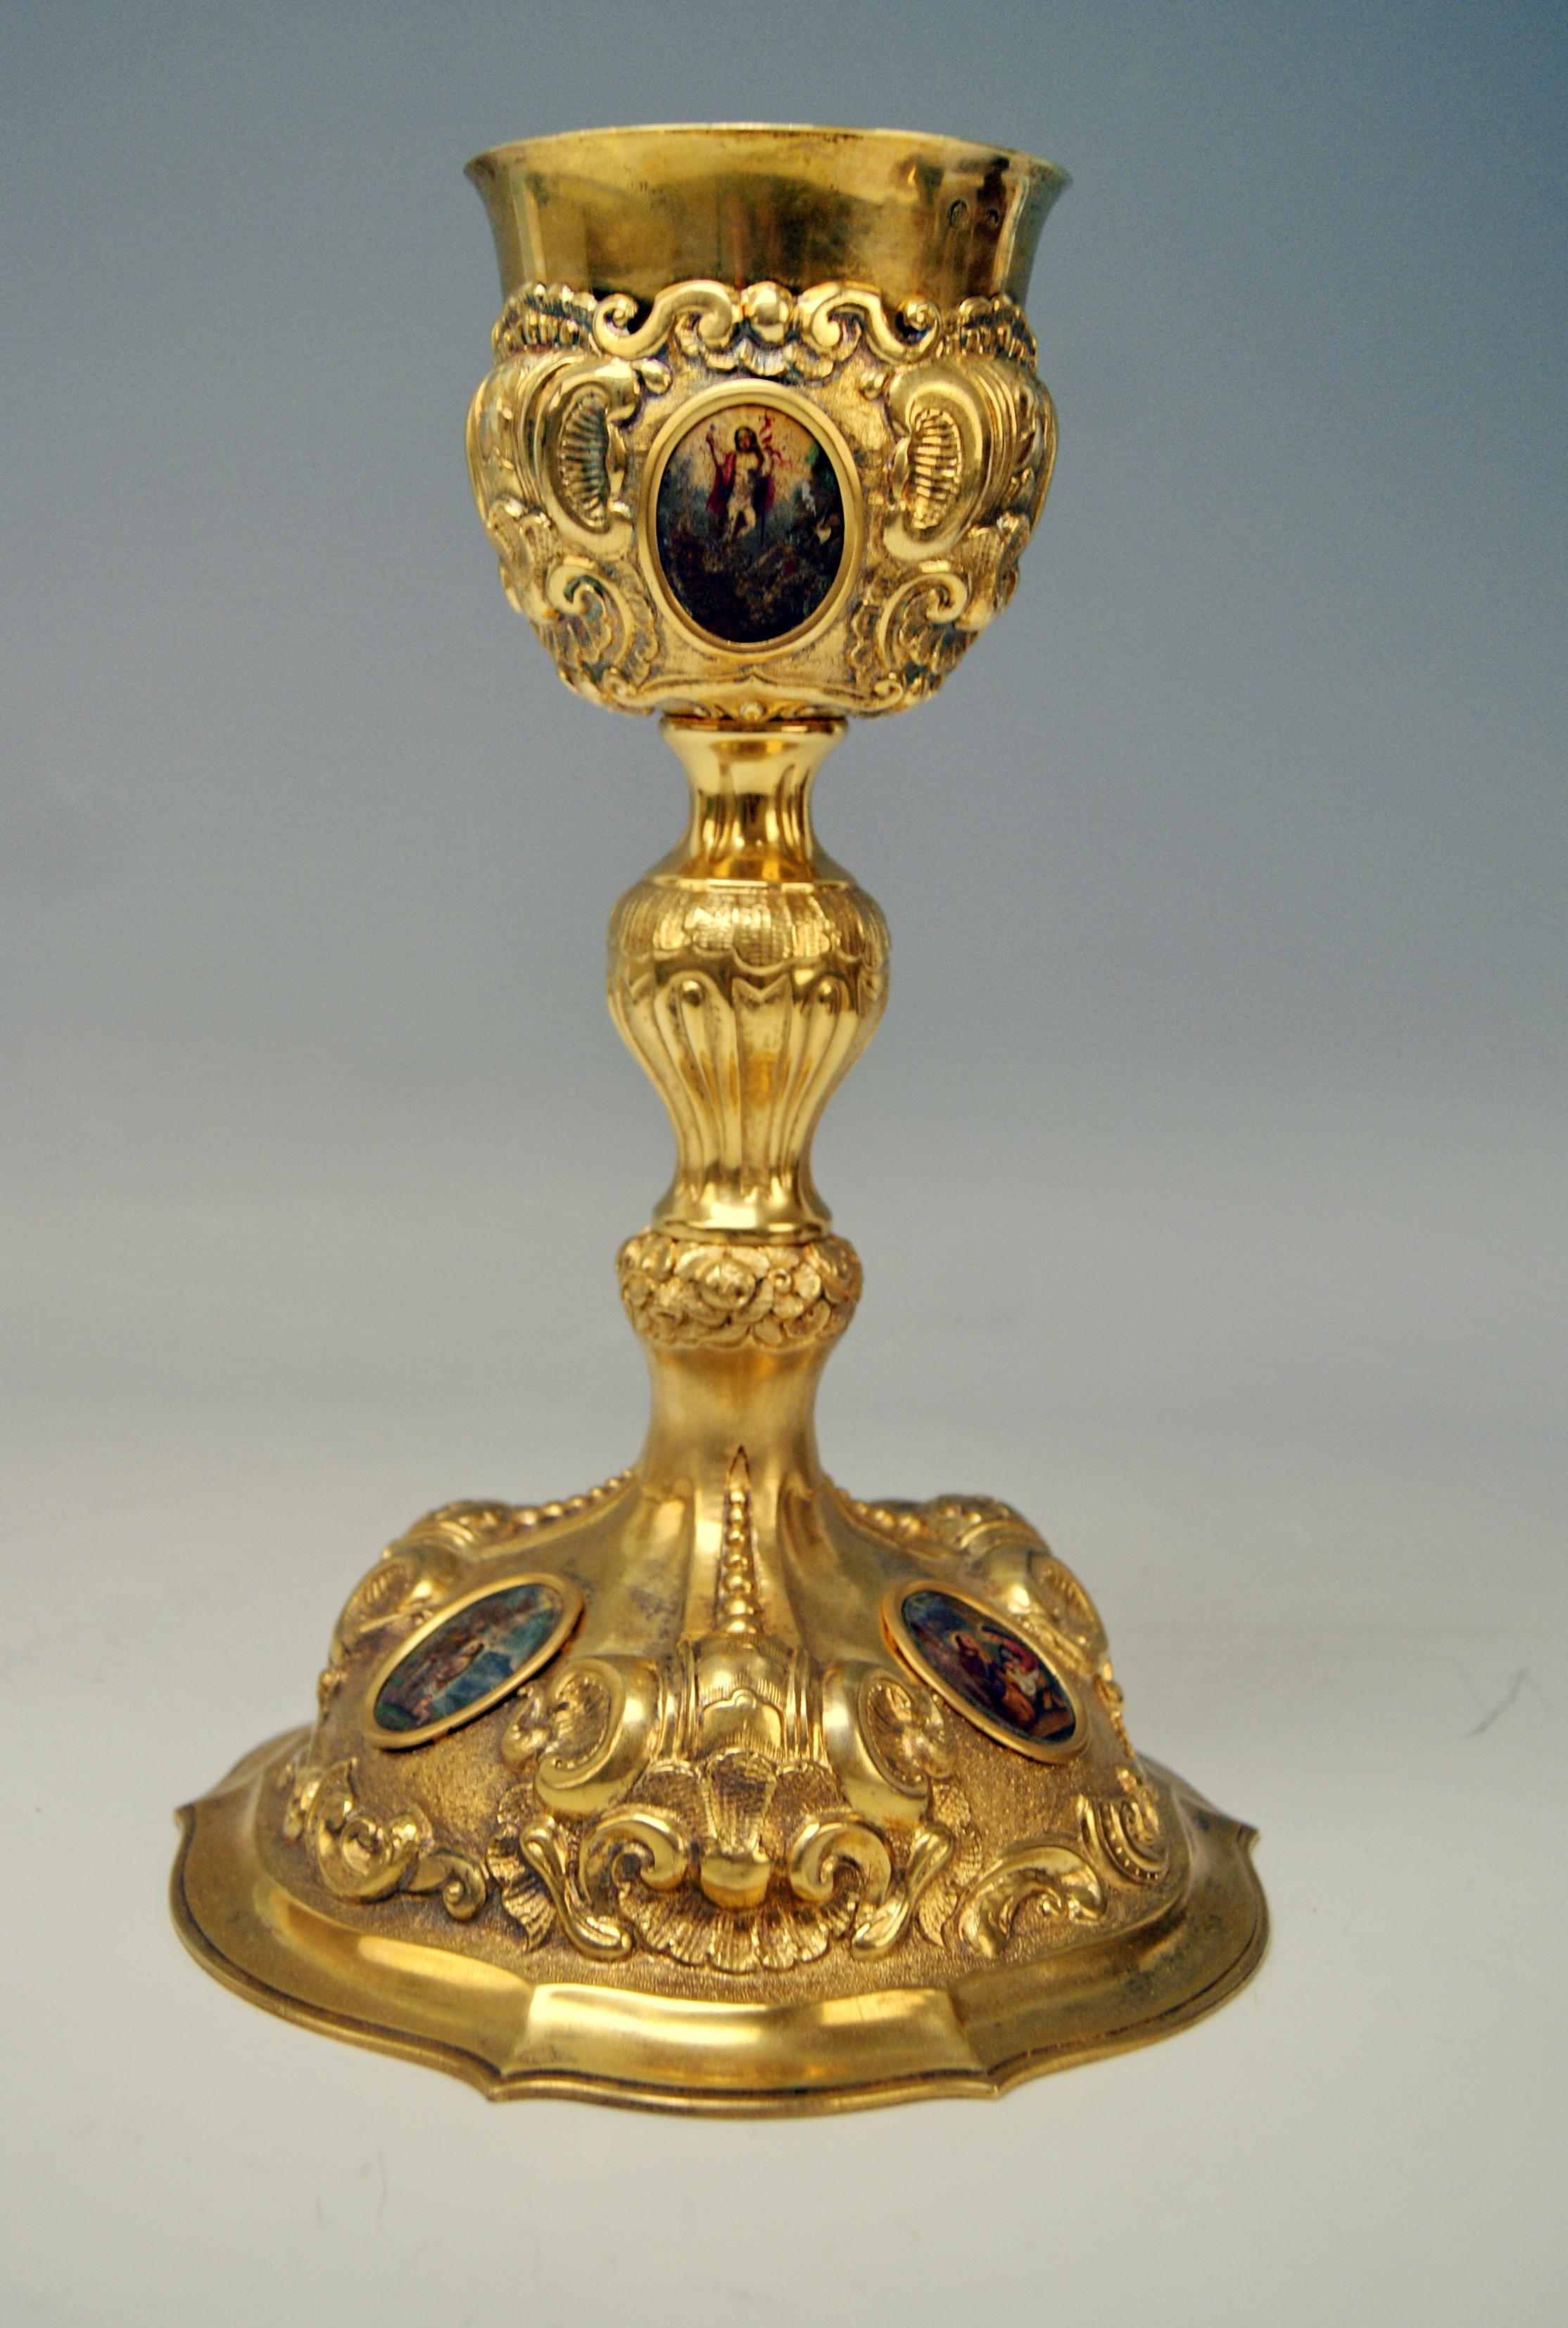 Viennese silver chalice gilded in original casket, 1864

Stunningly elaborated chalice in neo-Baroque, Augsburg type shape, made of gilded silver (chasing work). There is inserted a flat drinking vessel with widened edge into the stunningly